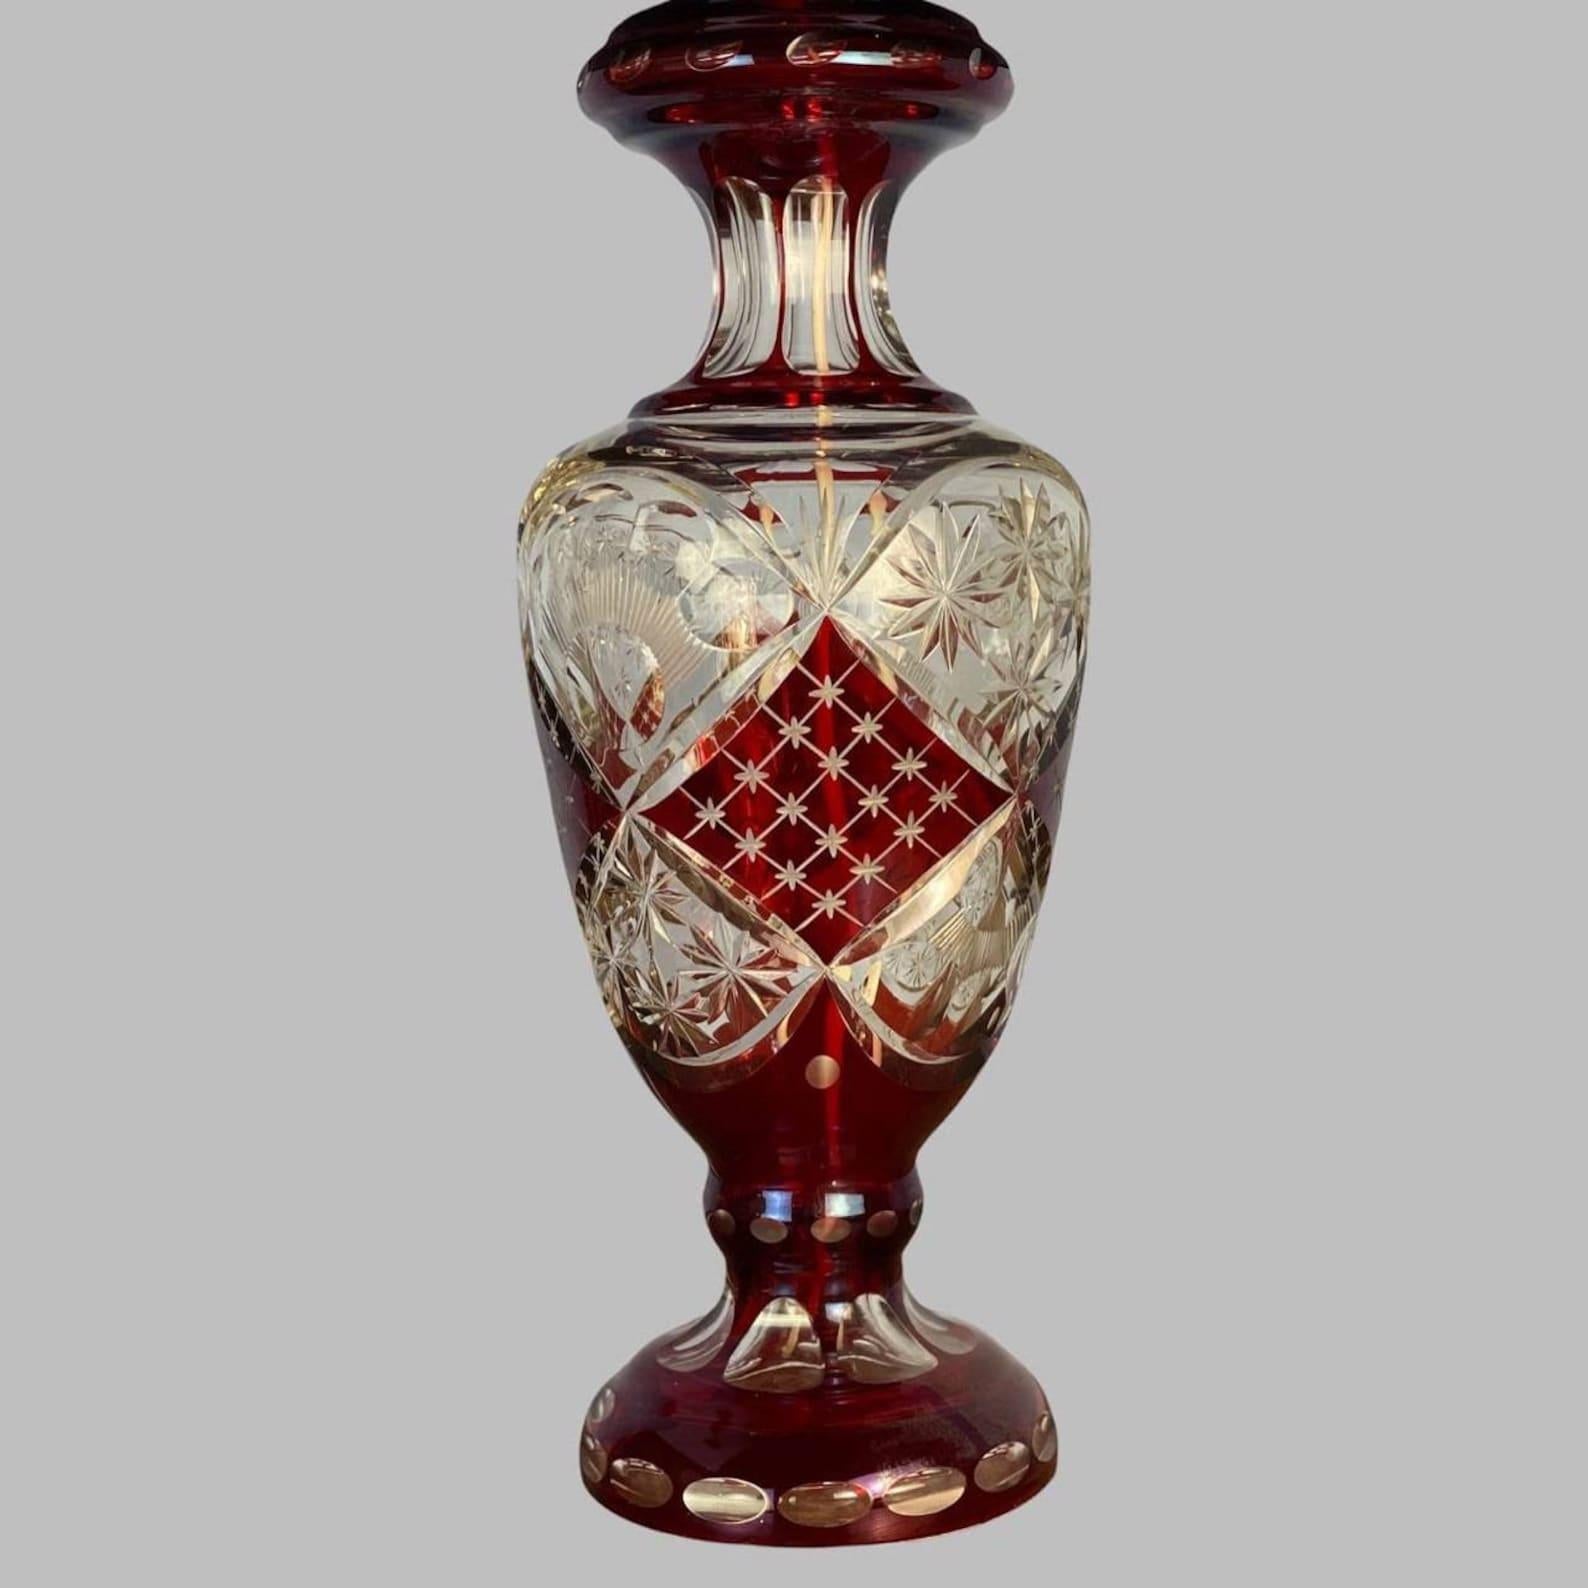 Original Lamp made of  Red Carved  Overhead Crystal, from the world-recognized WORLD TOP - Leader for the production of glass and crystal products, belgian factory VAL SAINT LAMBERT. 

  The base for the lamp made of colored crystal presented to